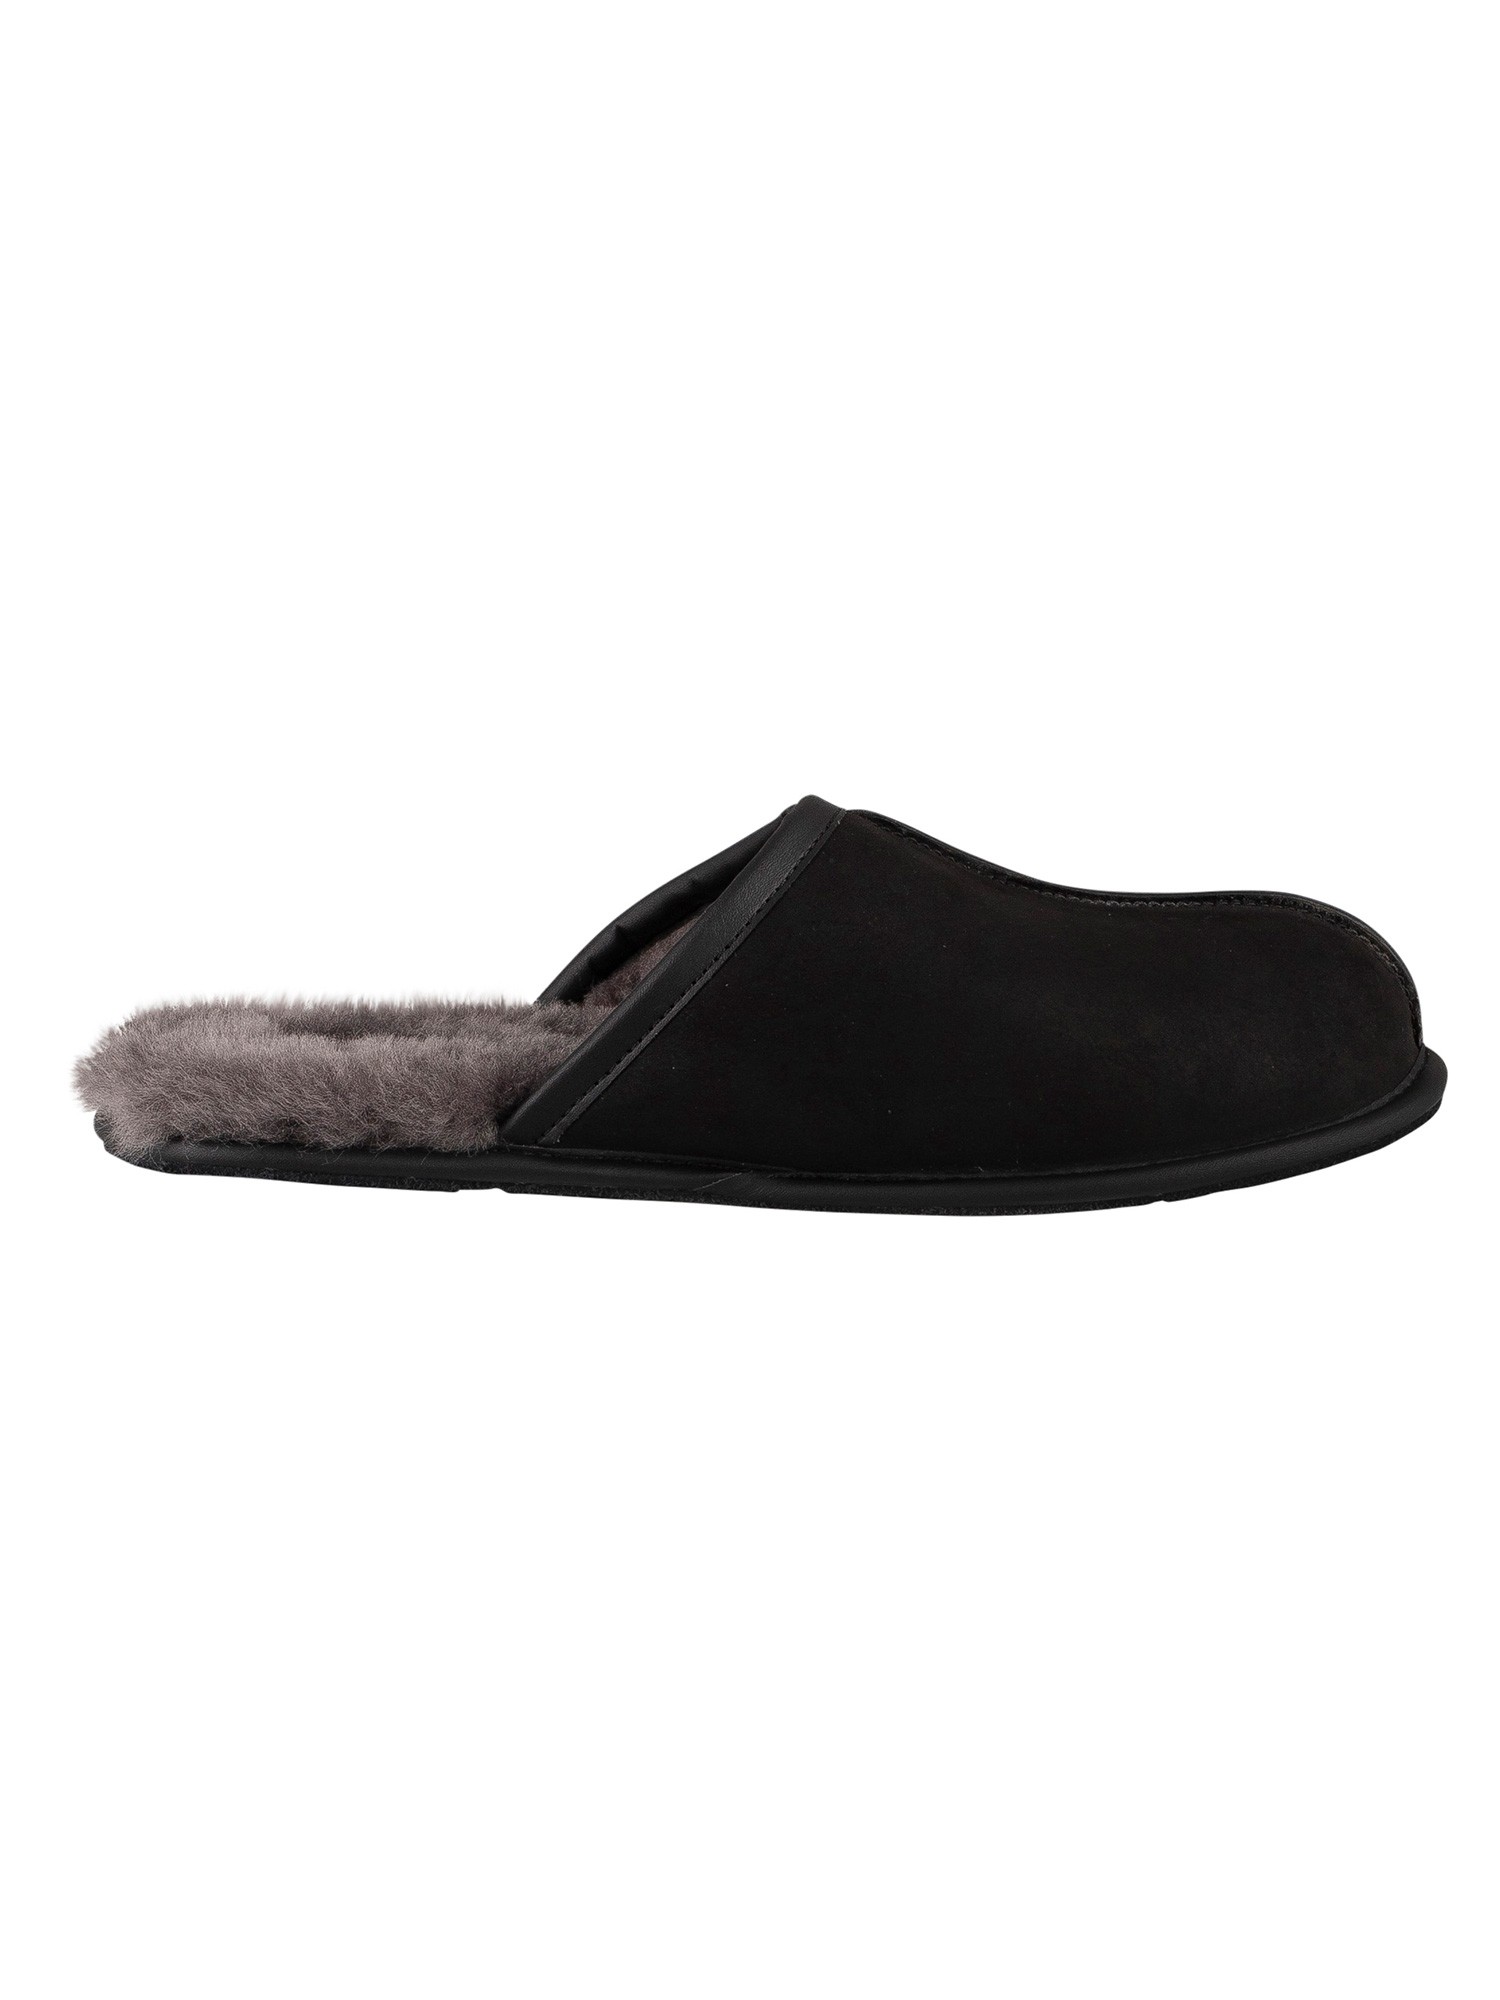 UGG Scuff Leather Slippers - Black | Standout